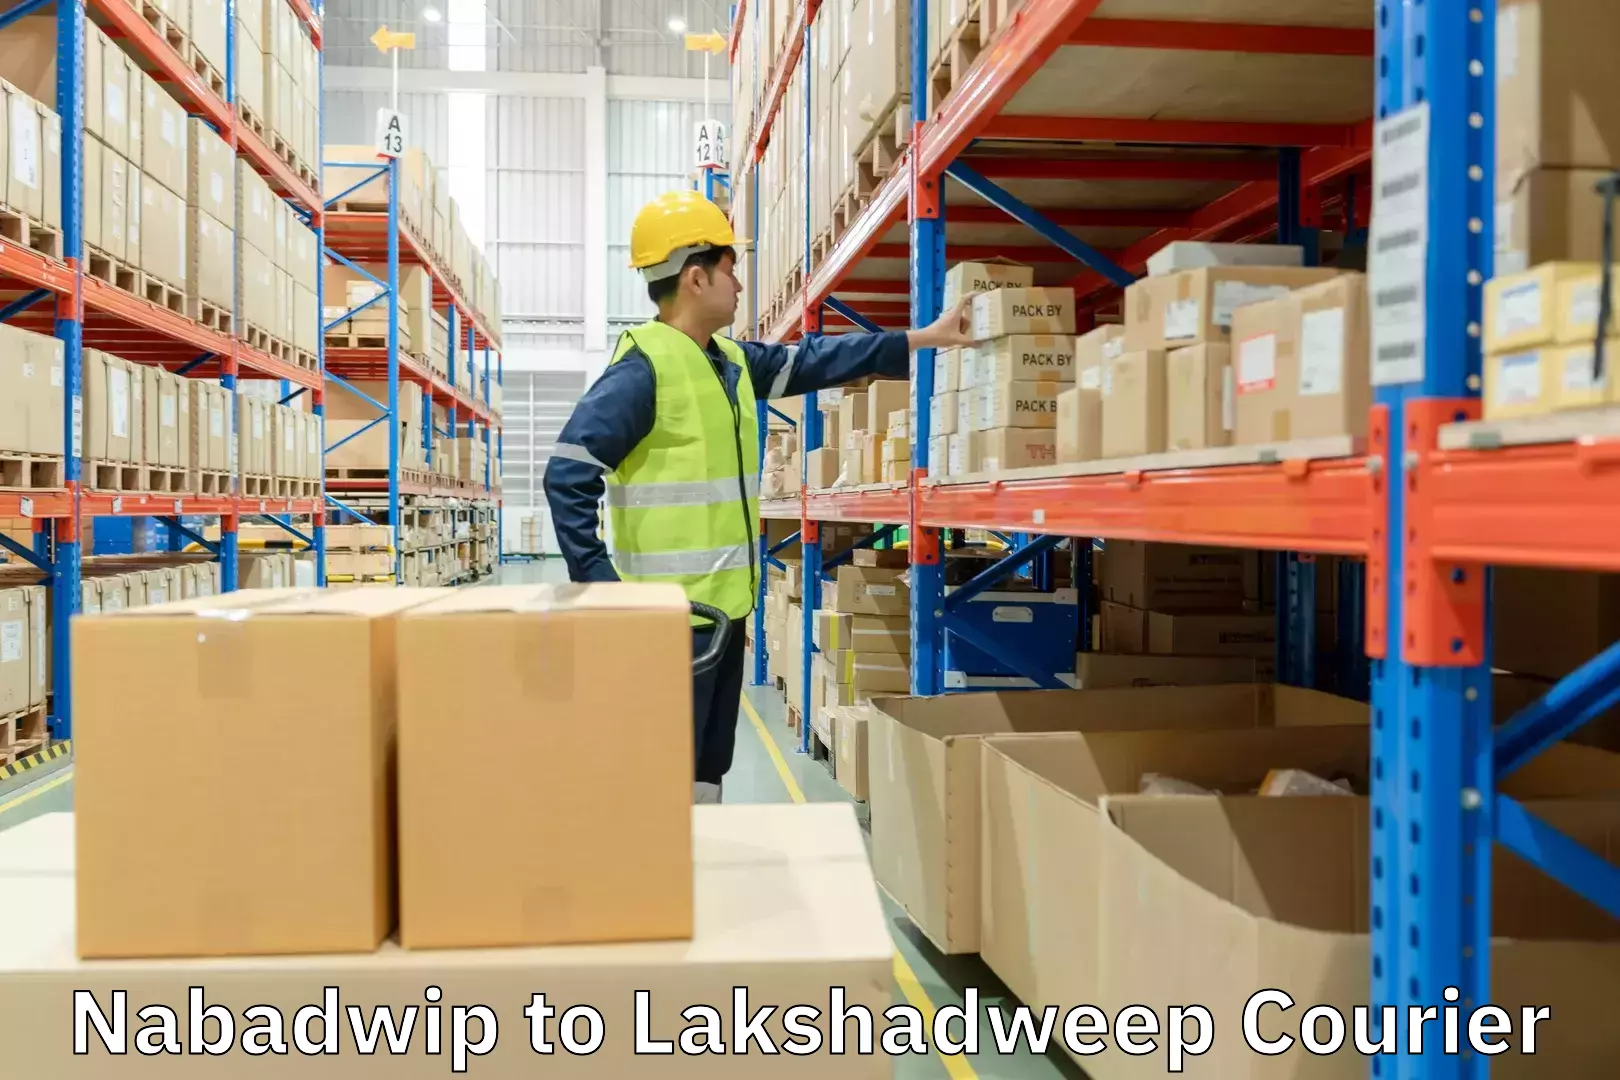 Sustainable shipping practices Nabadwip to Lakshadweep